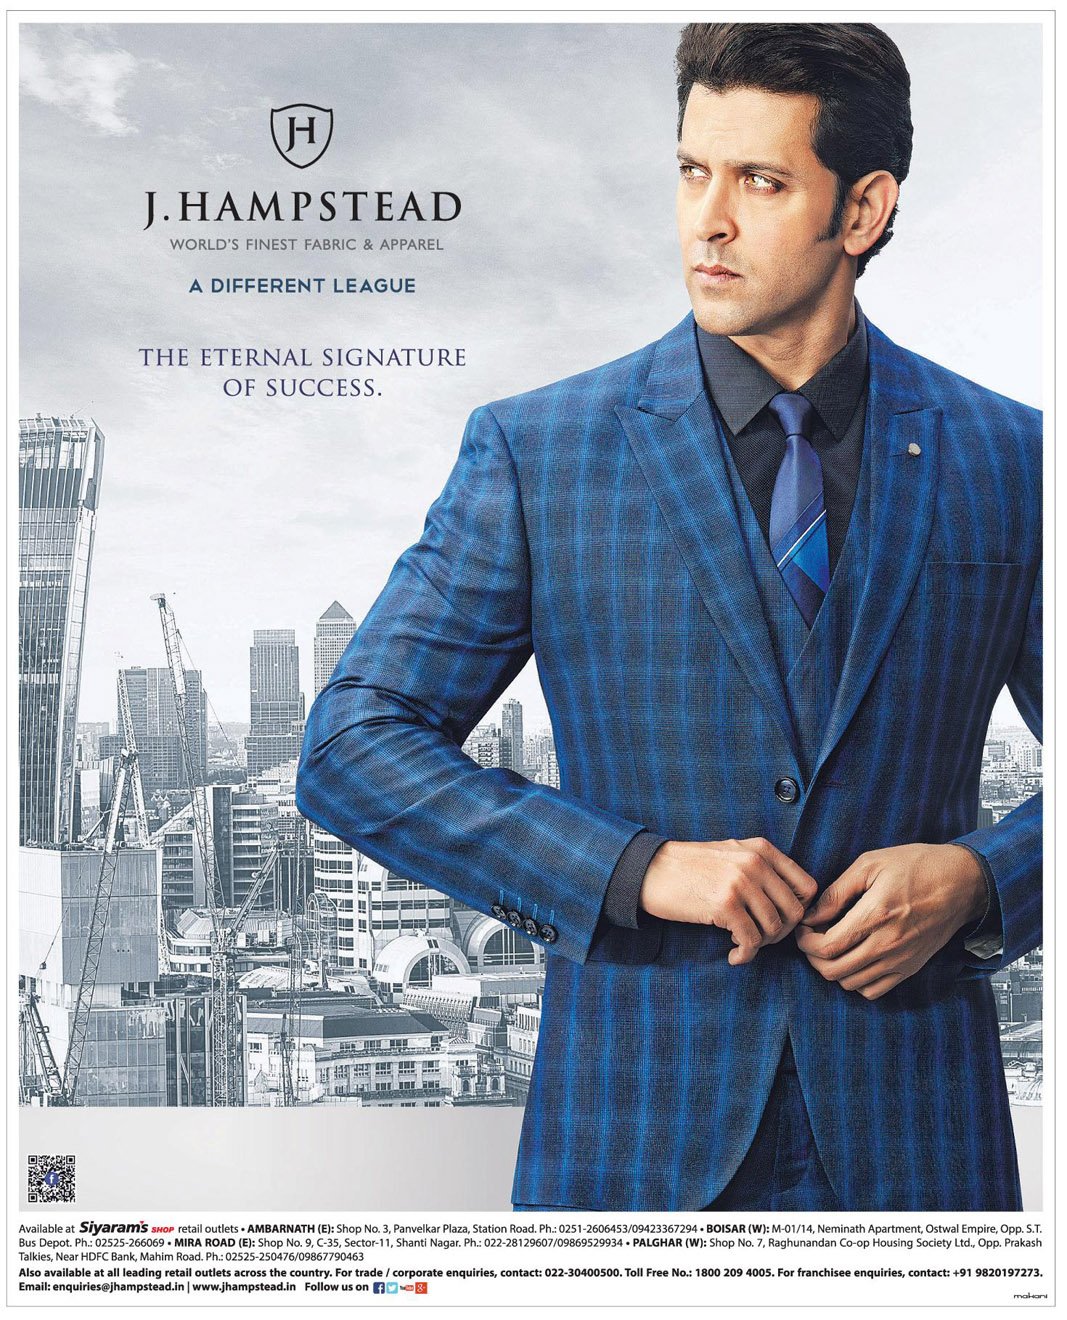 J.Hampstead Vadodara - Wherever you are, be it a party or in an office  meeting, look refined and sophisticated with the best quality clothing from  J.Hampstead. #Suit #Fabric #BespokeSuits #Vadodara #JHampstead #Gujarat #